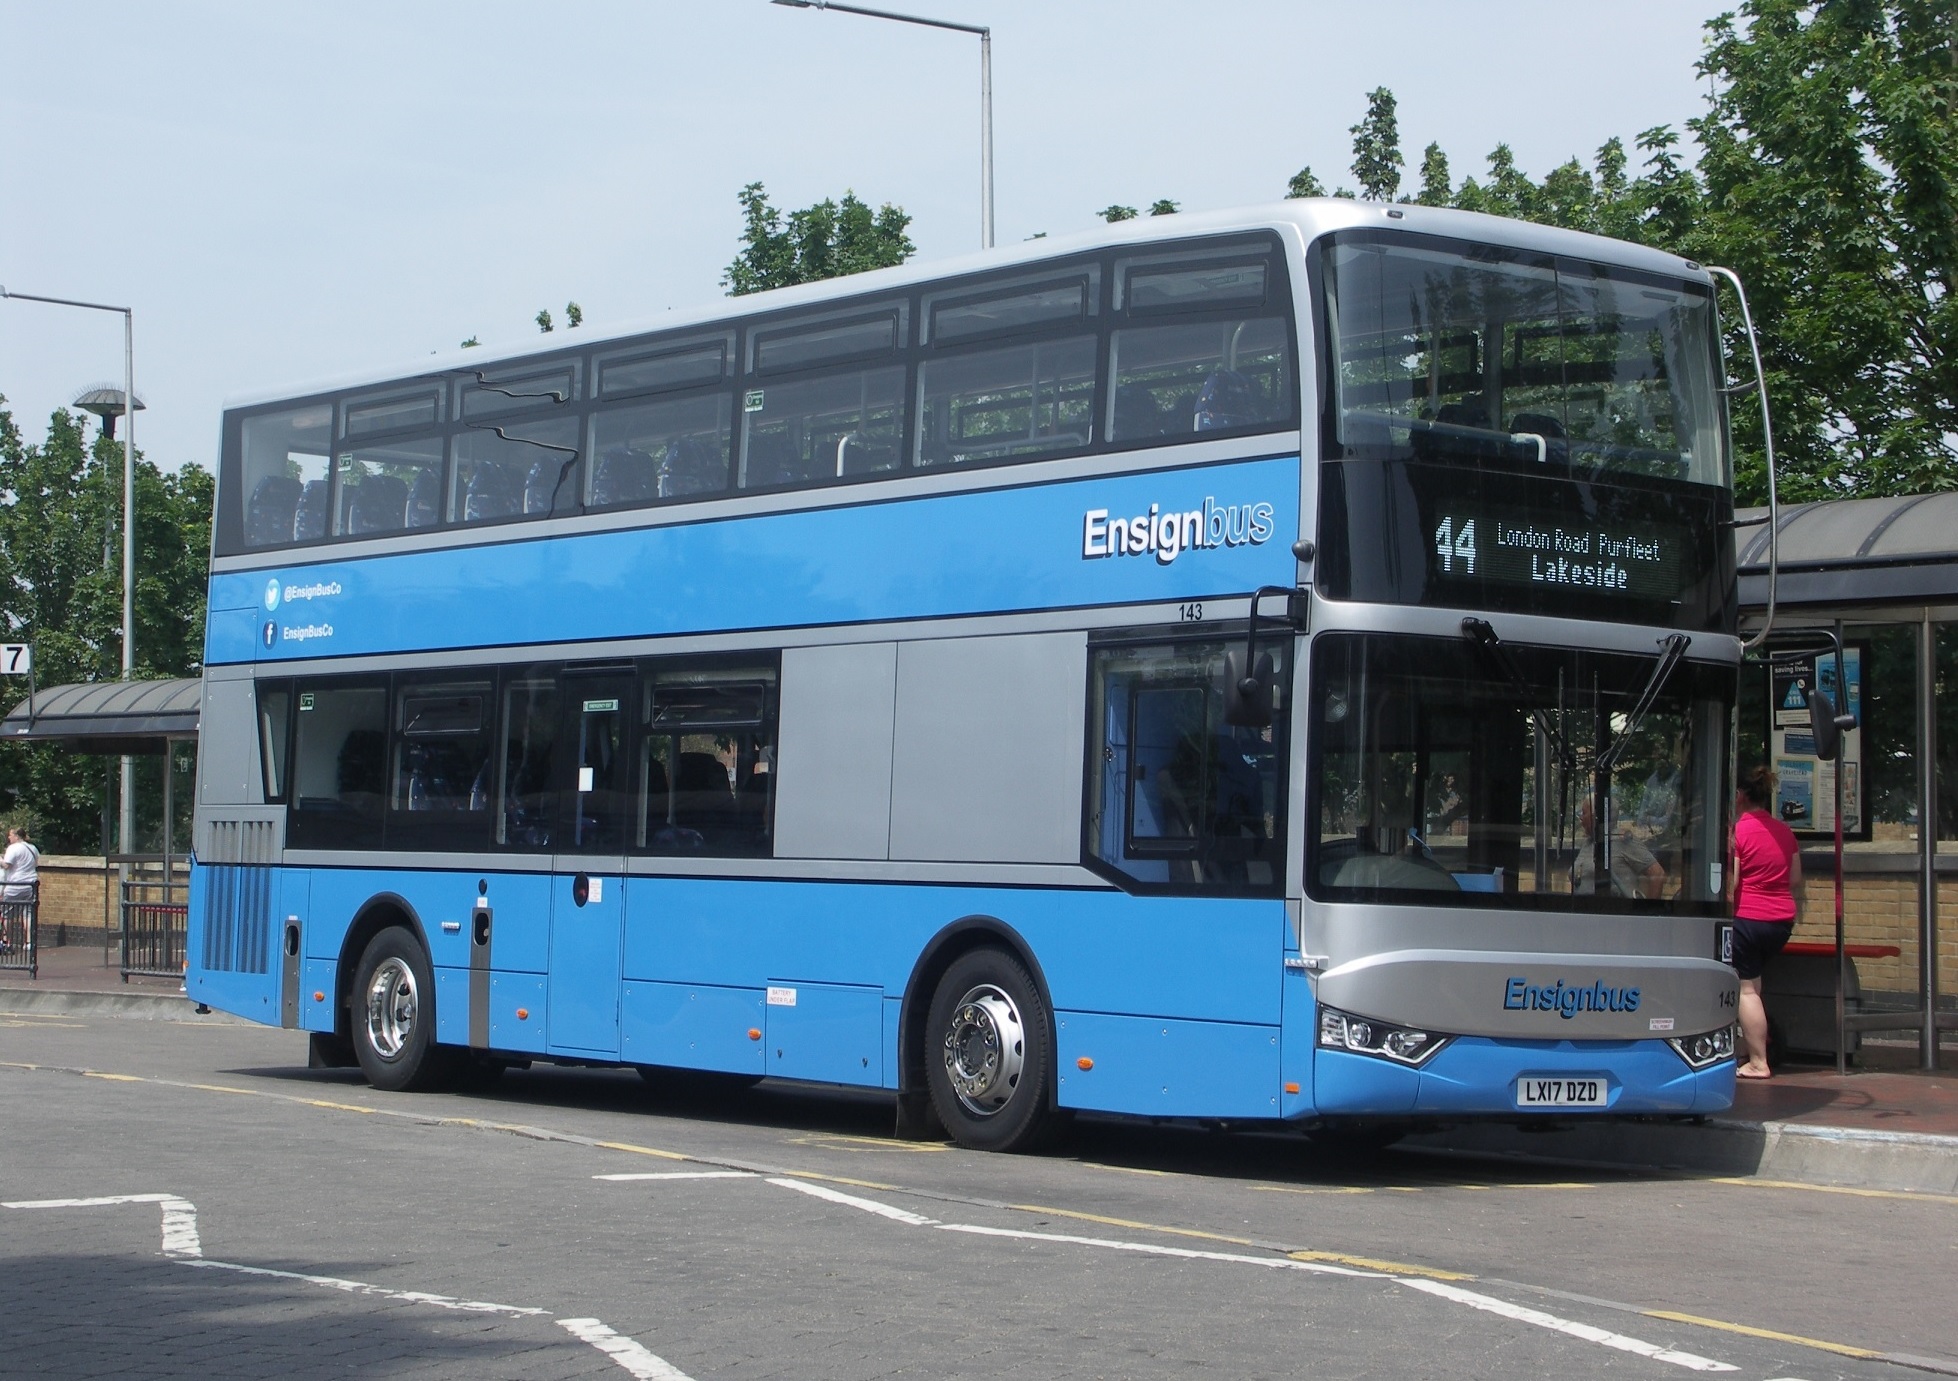 Ensignbus charts positive future under FirstGroup ownership